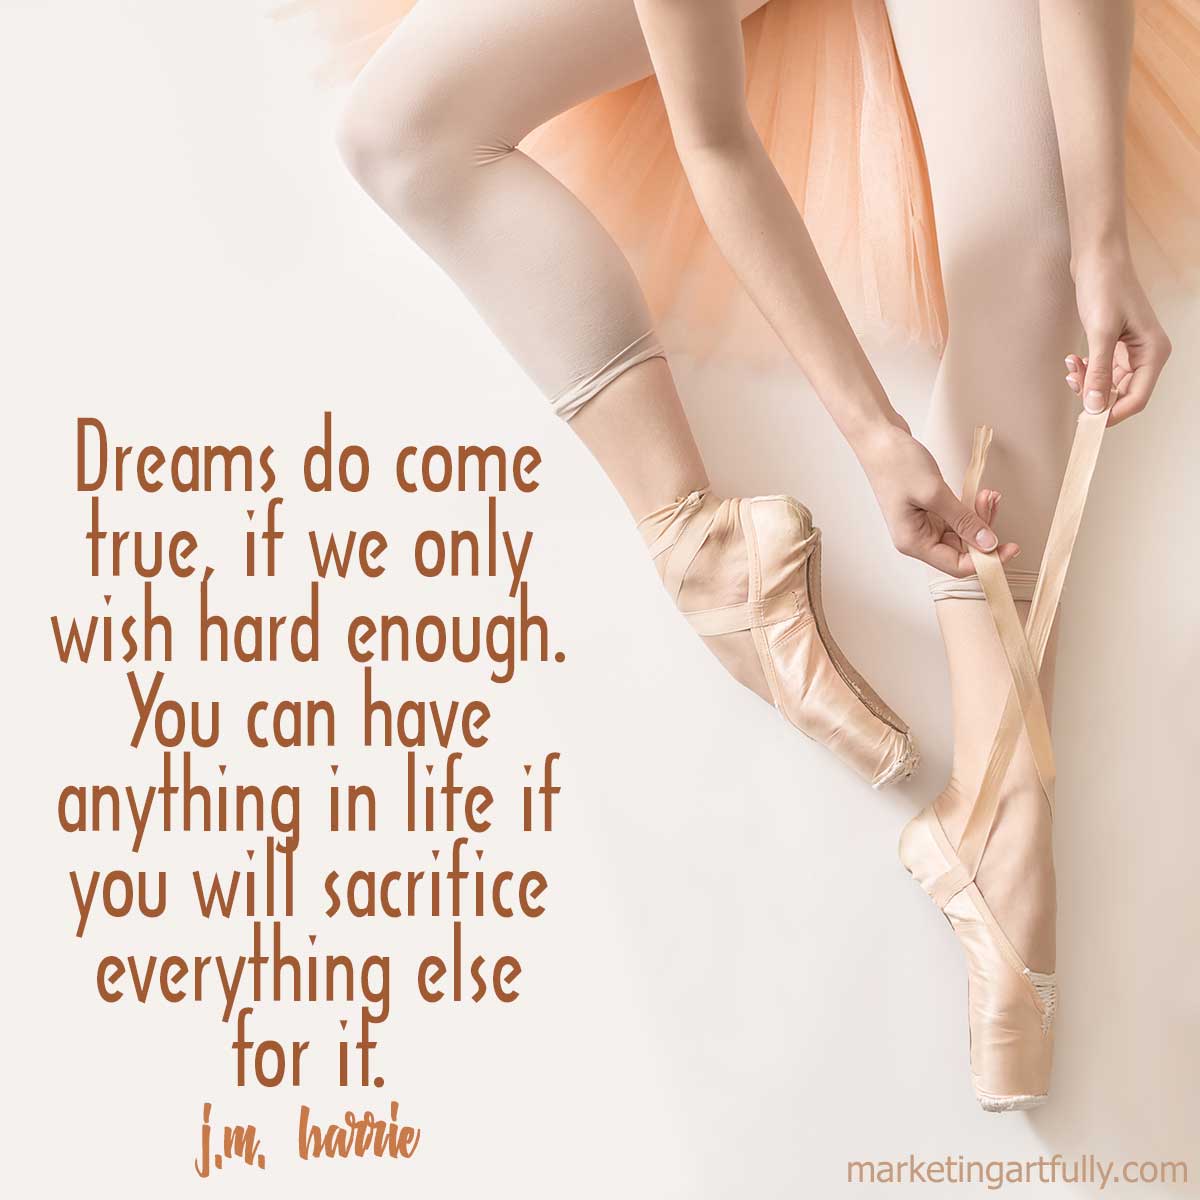 Dreams do come true, if we only wish hard enough. You can have anything in life if you will sacrifice everything else for it.J. M. Barrie, Dramatist